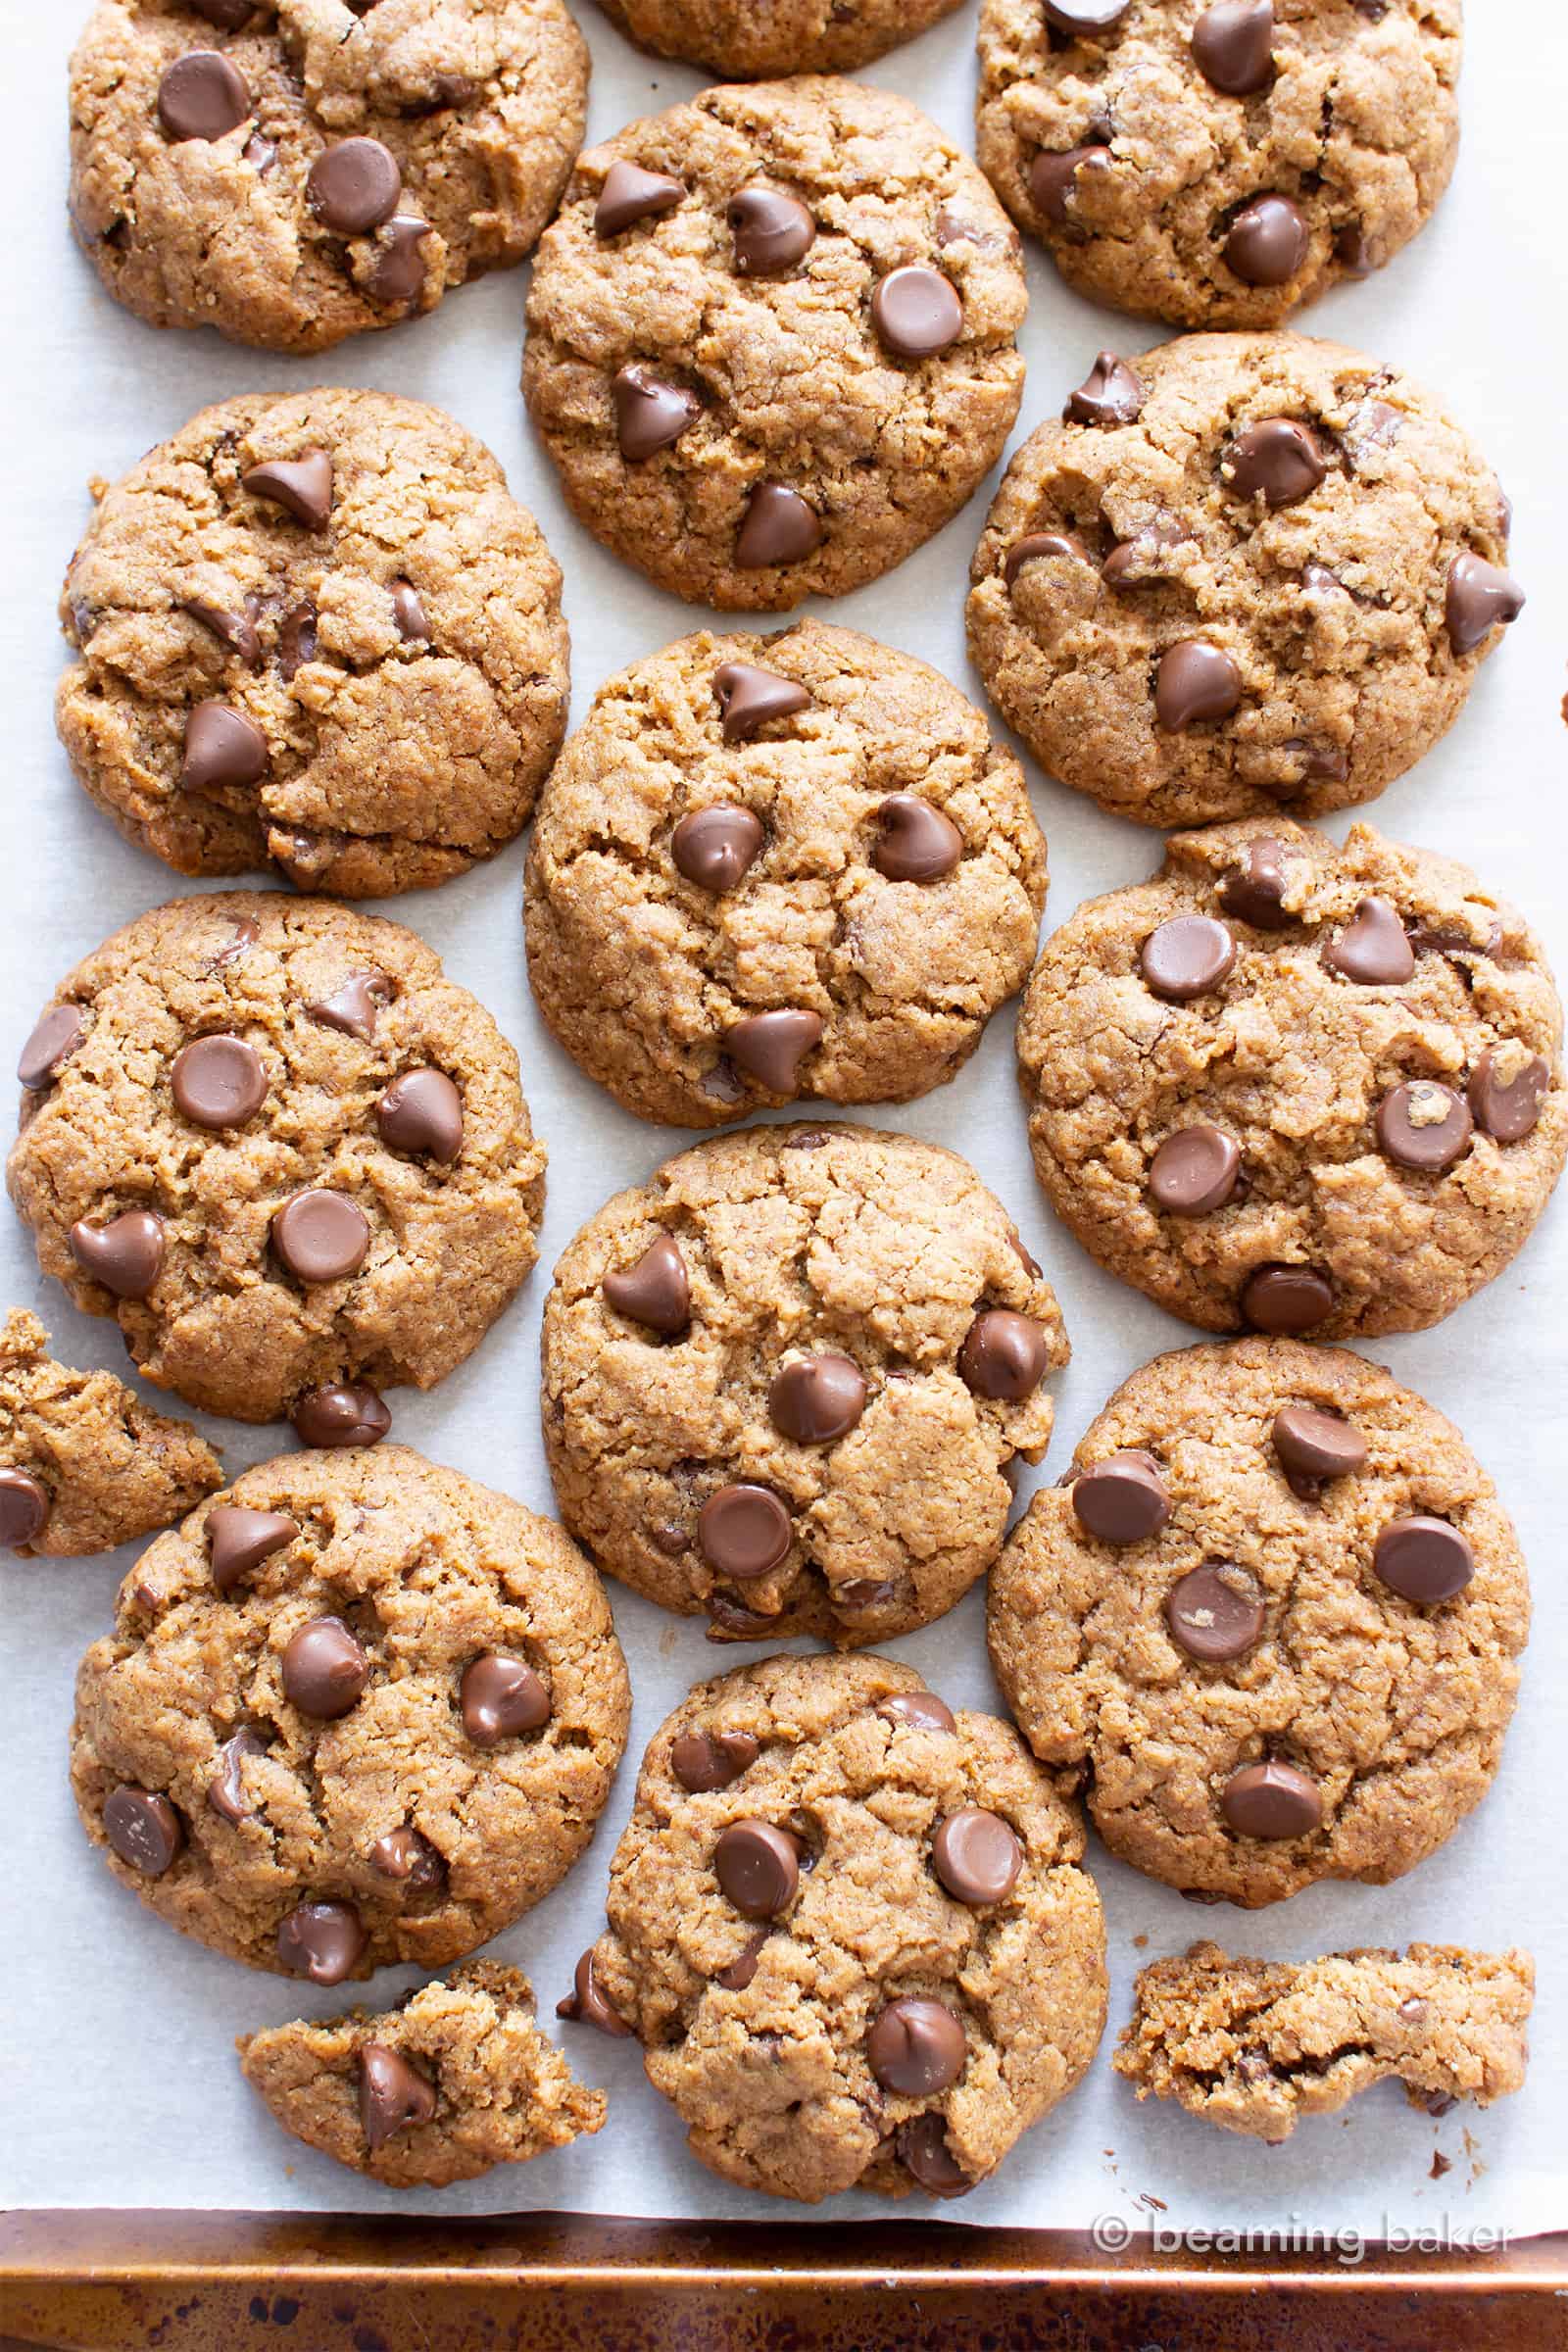 Vegan Paleo Chocolate Chip Cookies Recipe: the BEST paleo chocolate chip cookies made with coconut flour. Think: chewy exterior, soft interior, bursting with melty chocolate goodness! Meet your favorite gluten free chocolate chip cookies. #Paleo #Chocolate #Cookies #Vegan #GrainFree | Recipe at BeamingBaker.com